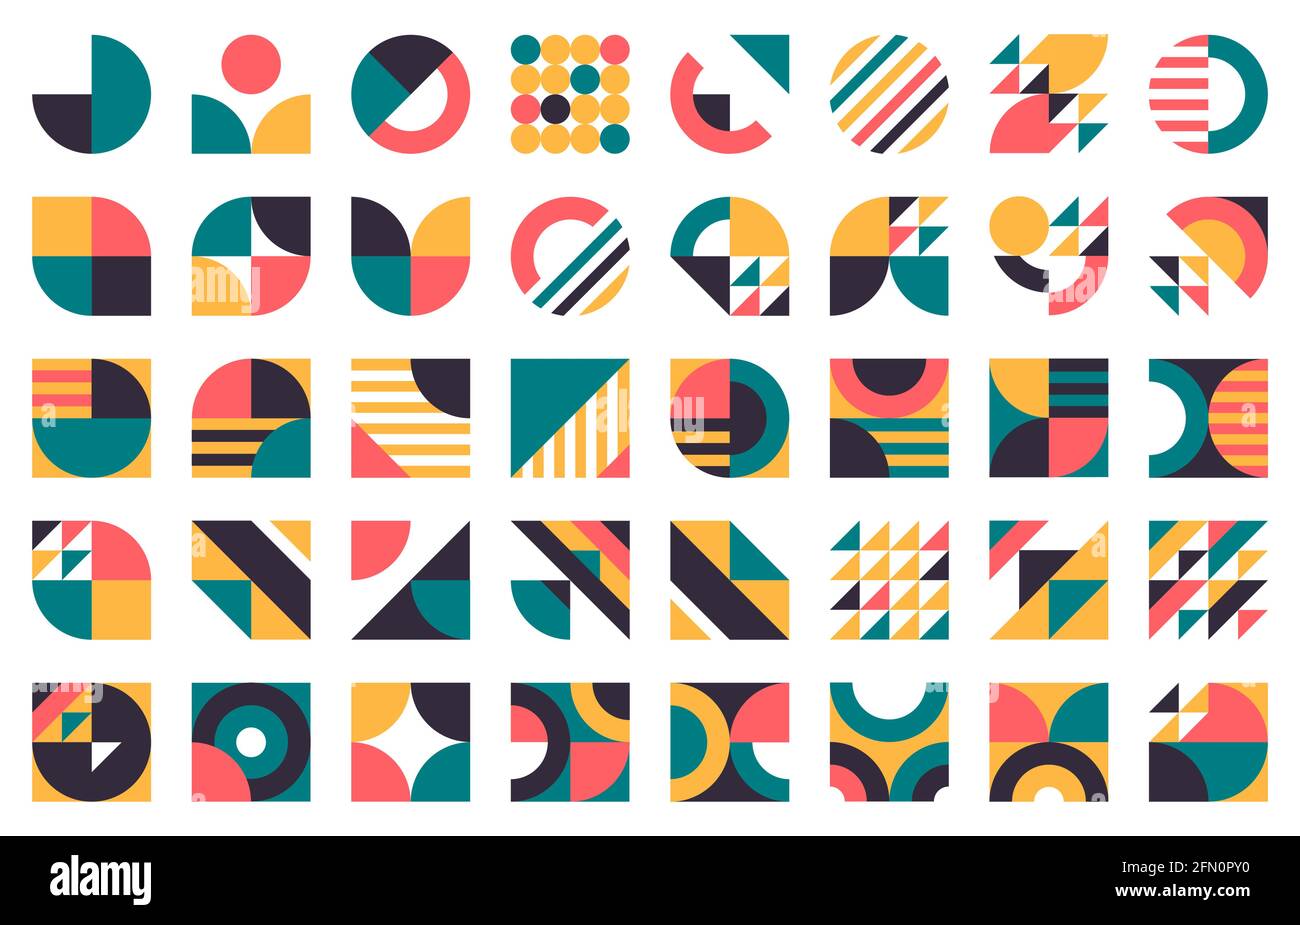 Abstract bauhaus shapes. Modern circles, triangles and squares, minimal style bauhaus figures vector illustration set. Graphic style design elements Stock Vector